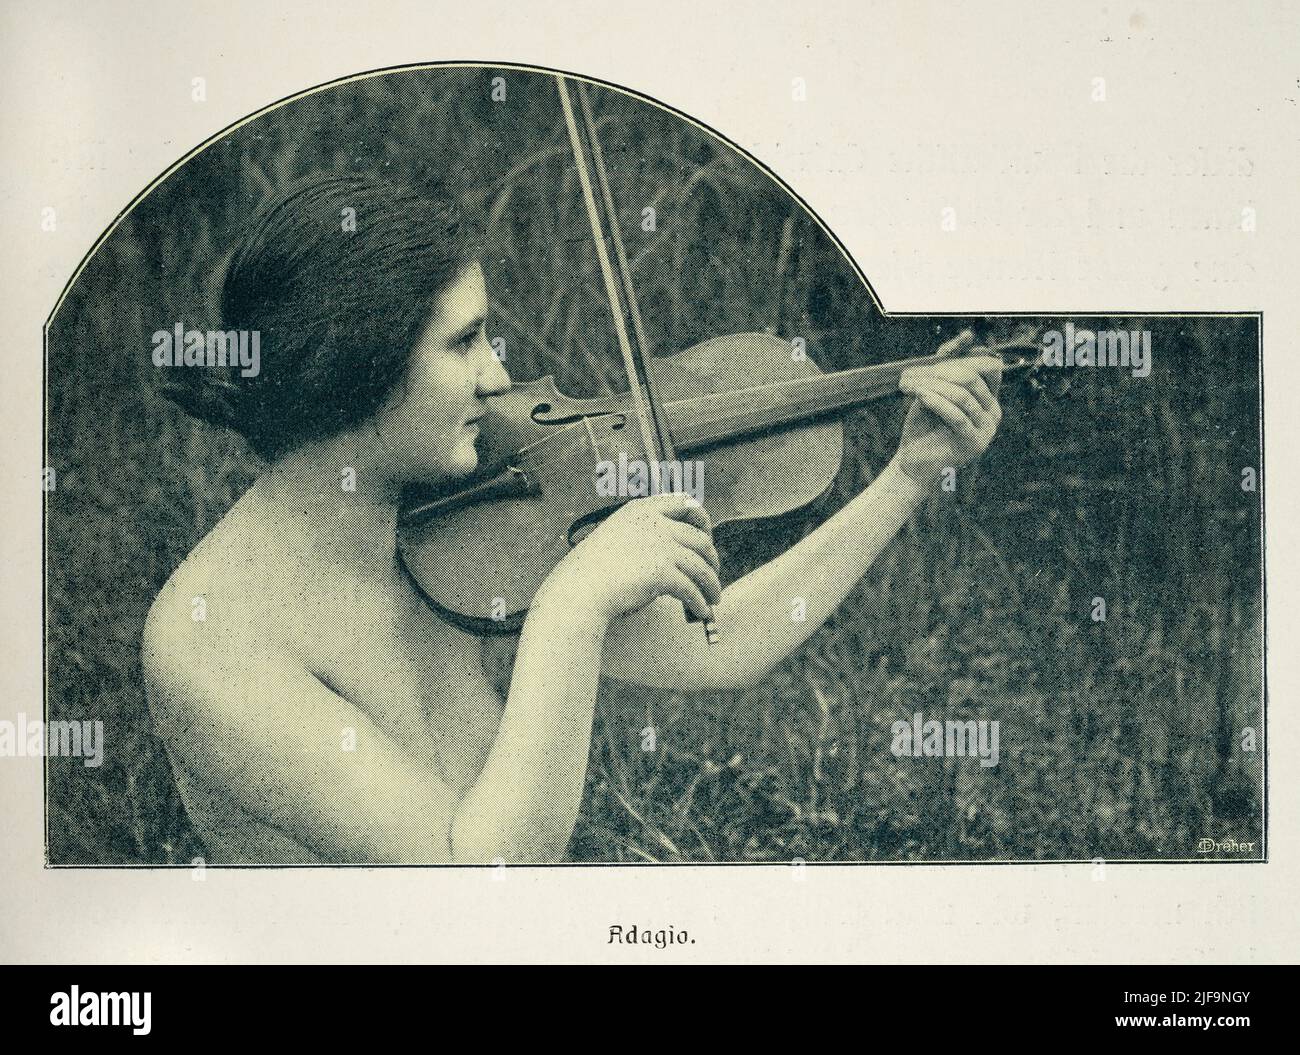 Early vintage photograph of a nude woman playing the violin, violinist, German, 1900s. Study of female beauty. Adagio Stock Photo